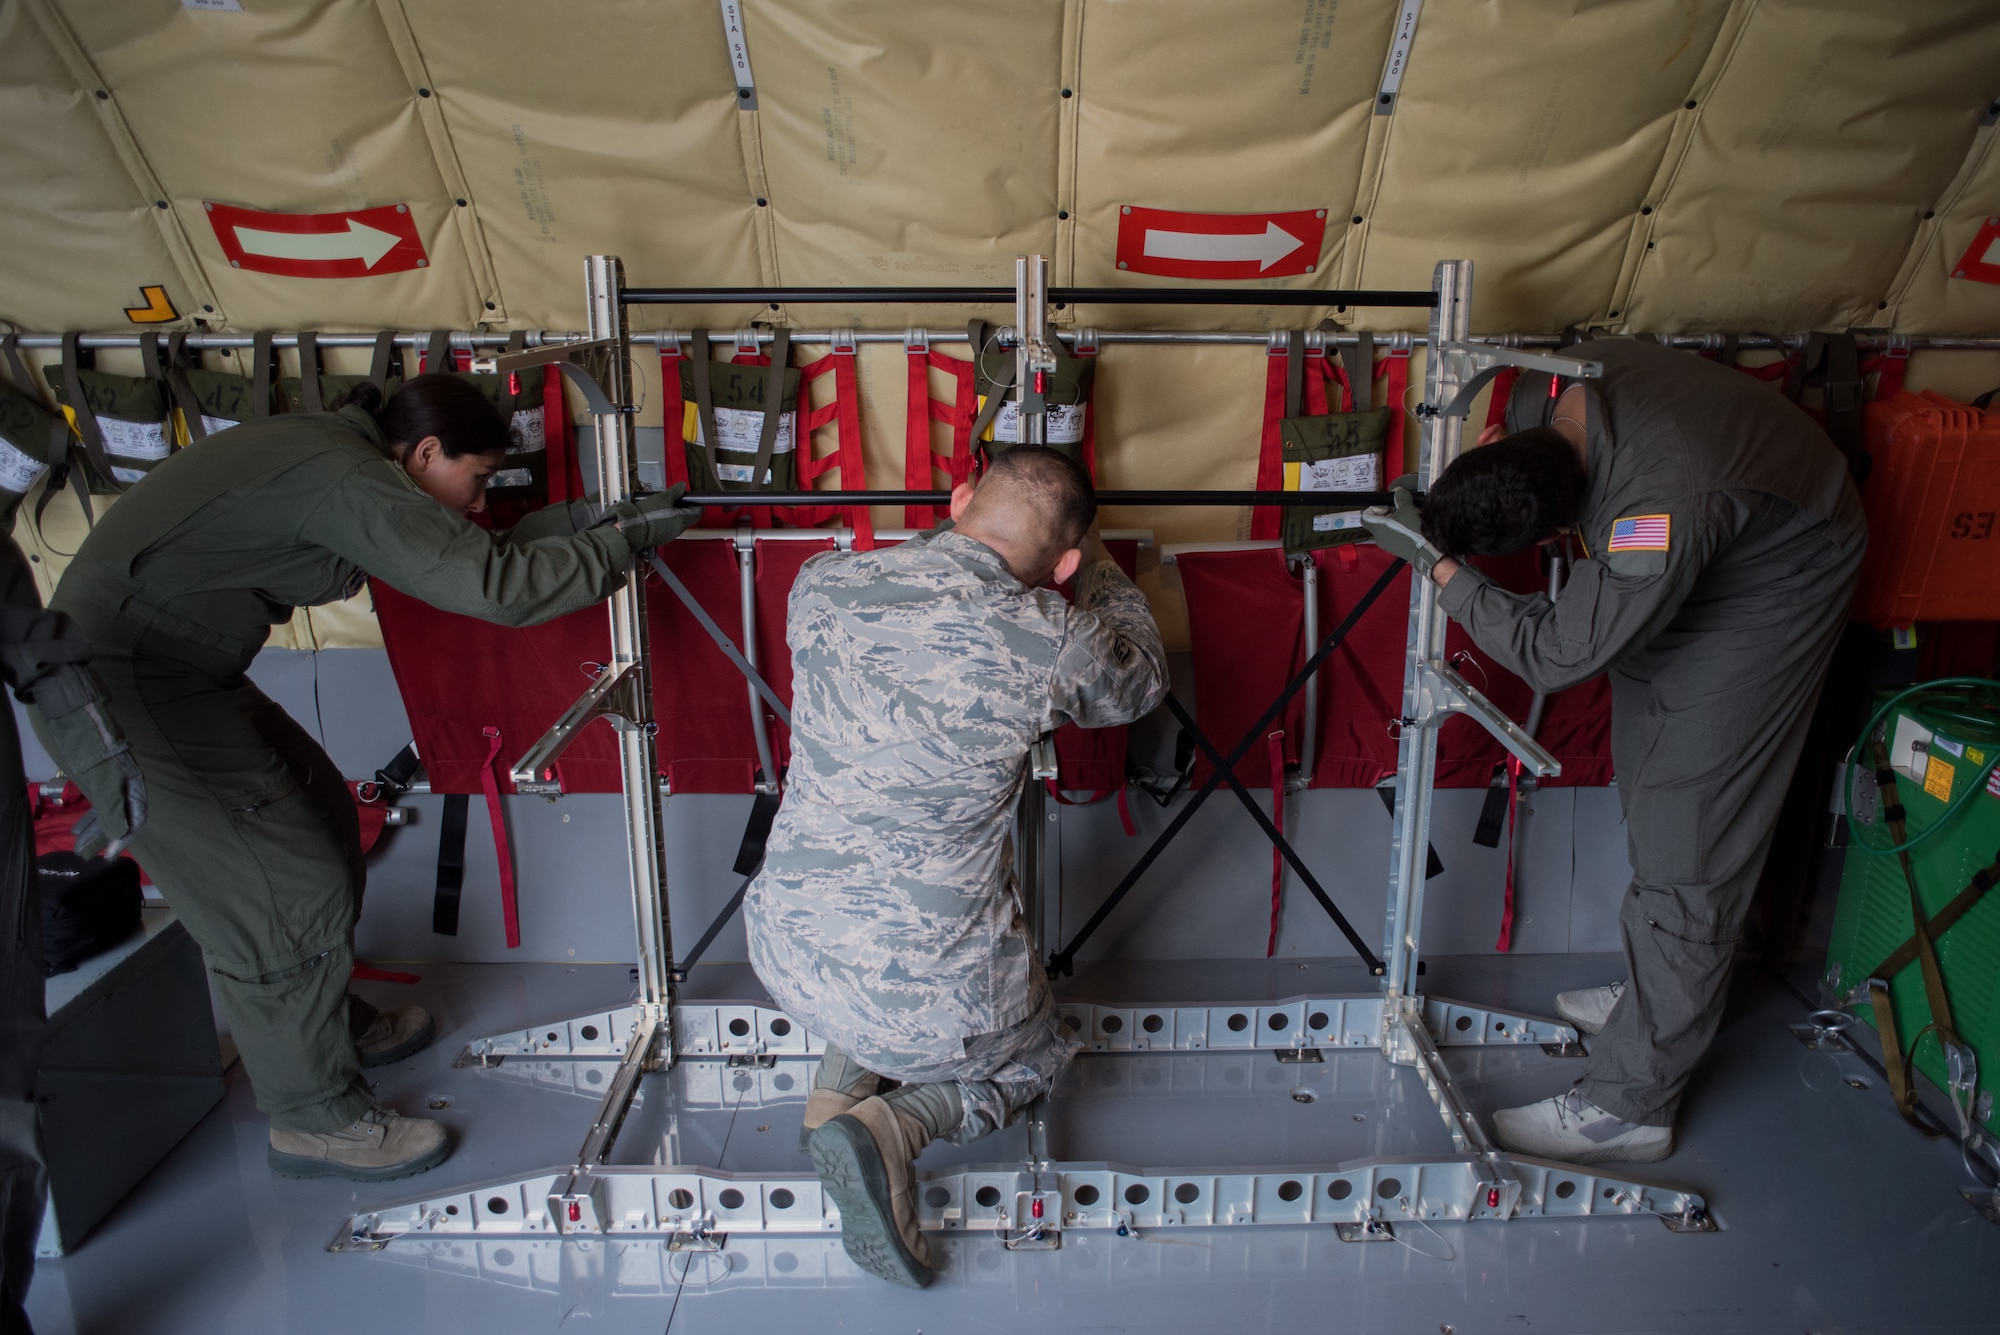 Aeromedical evacuation technicians assemble a stanchion litter system (SLS) before completing in-flight medical scenarios on a 507th Air Refueling Wing KC-135 Stratotanker at Tinker Air Force Base, Oklahoma, March 27, 2018. The flight was a part of MATOP (Multiple Aircraft Training Opportunity Program), a hands-on training program organized by the 137th Aeromedical Evacuation Squadron at Will Rogers Air National Guard Base in Oklahoma City. It was designed to provide aeromedical evacuation squadrons from across the U.S. opportunities to work with the C-130 Hercules, KC-135 Stratotanker and C-17 Globemaster III. The flight brought together aeromedical evacuation units from California, West Virginia, North Carolina, Minnesota, Wyoming, Delaware, Mississippi, New York and Oklahoma.(U.S. Air National Guard photo by Staff Sgt. Tyler Woodward)